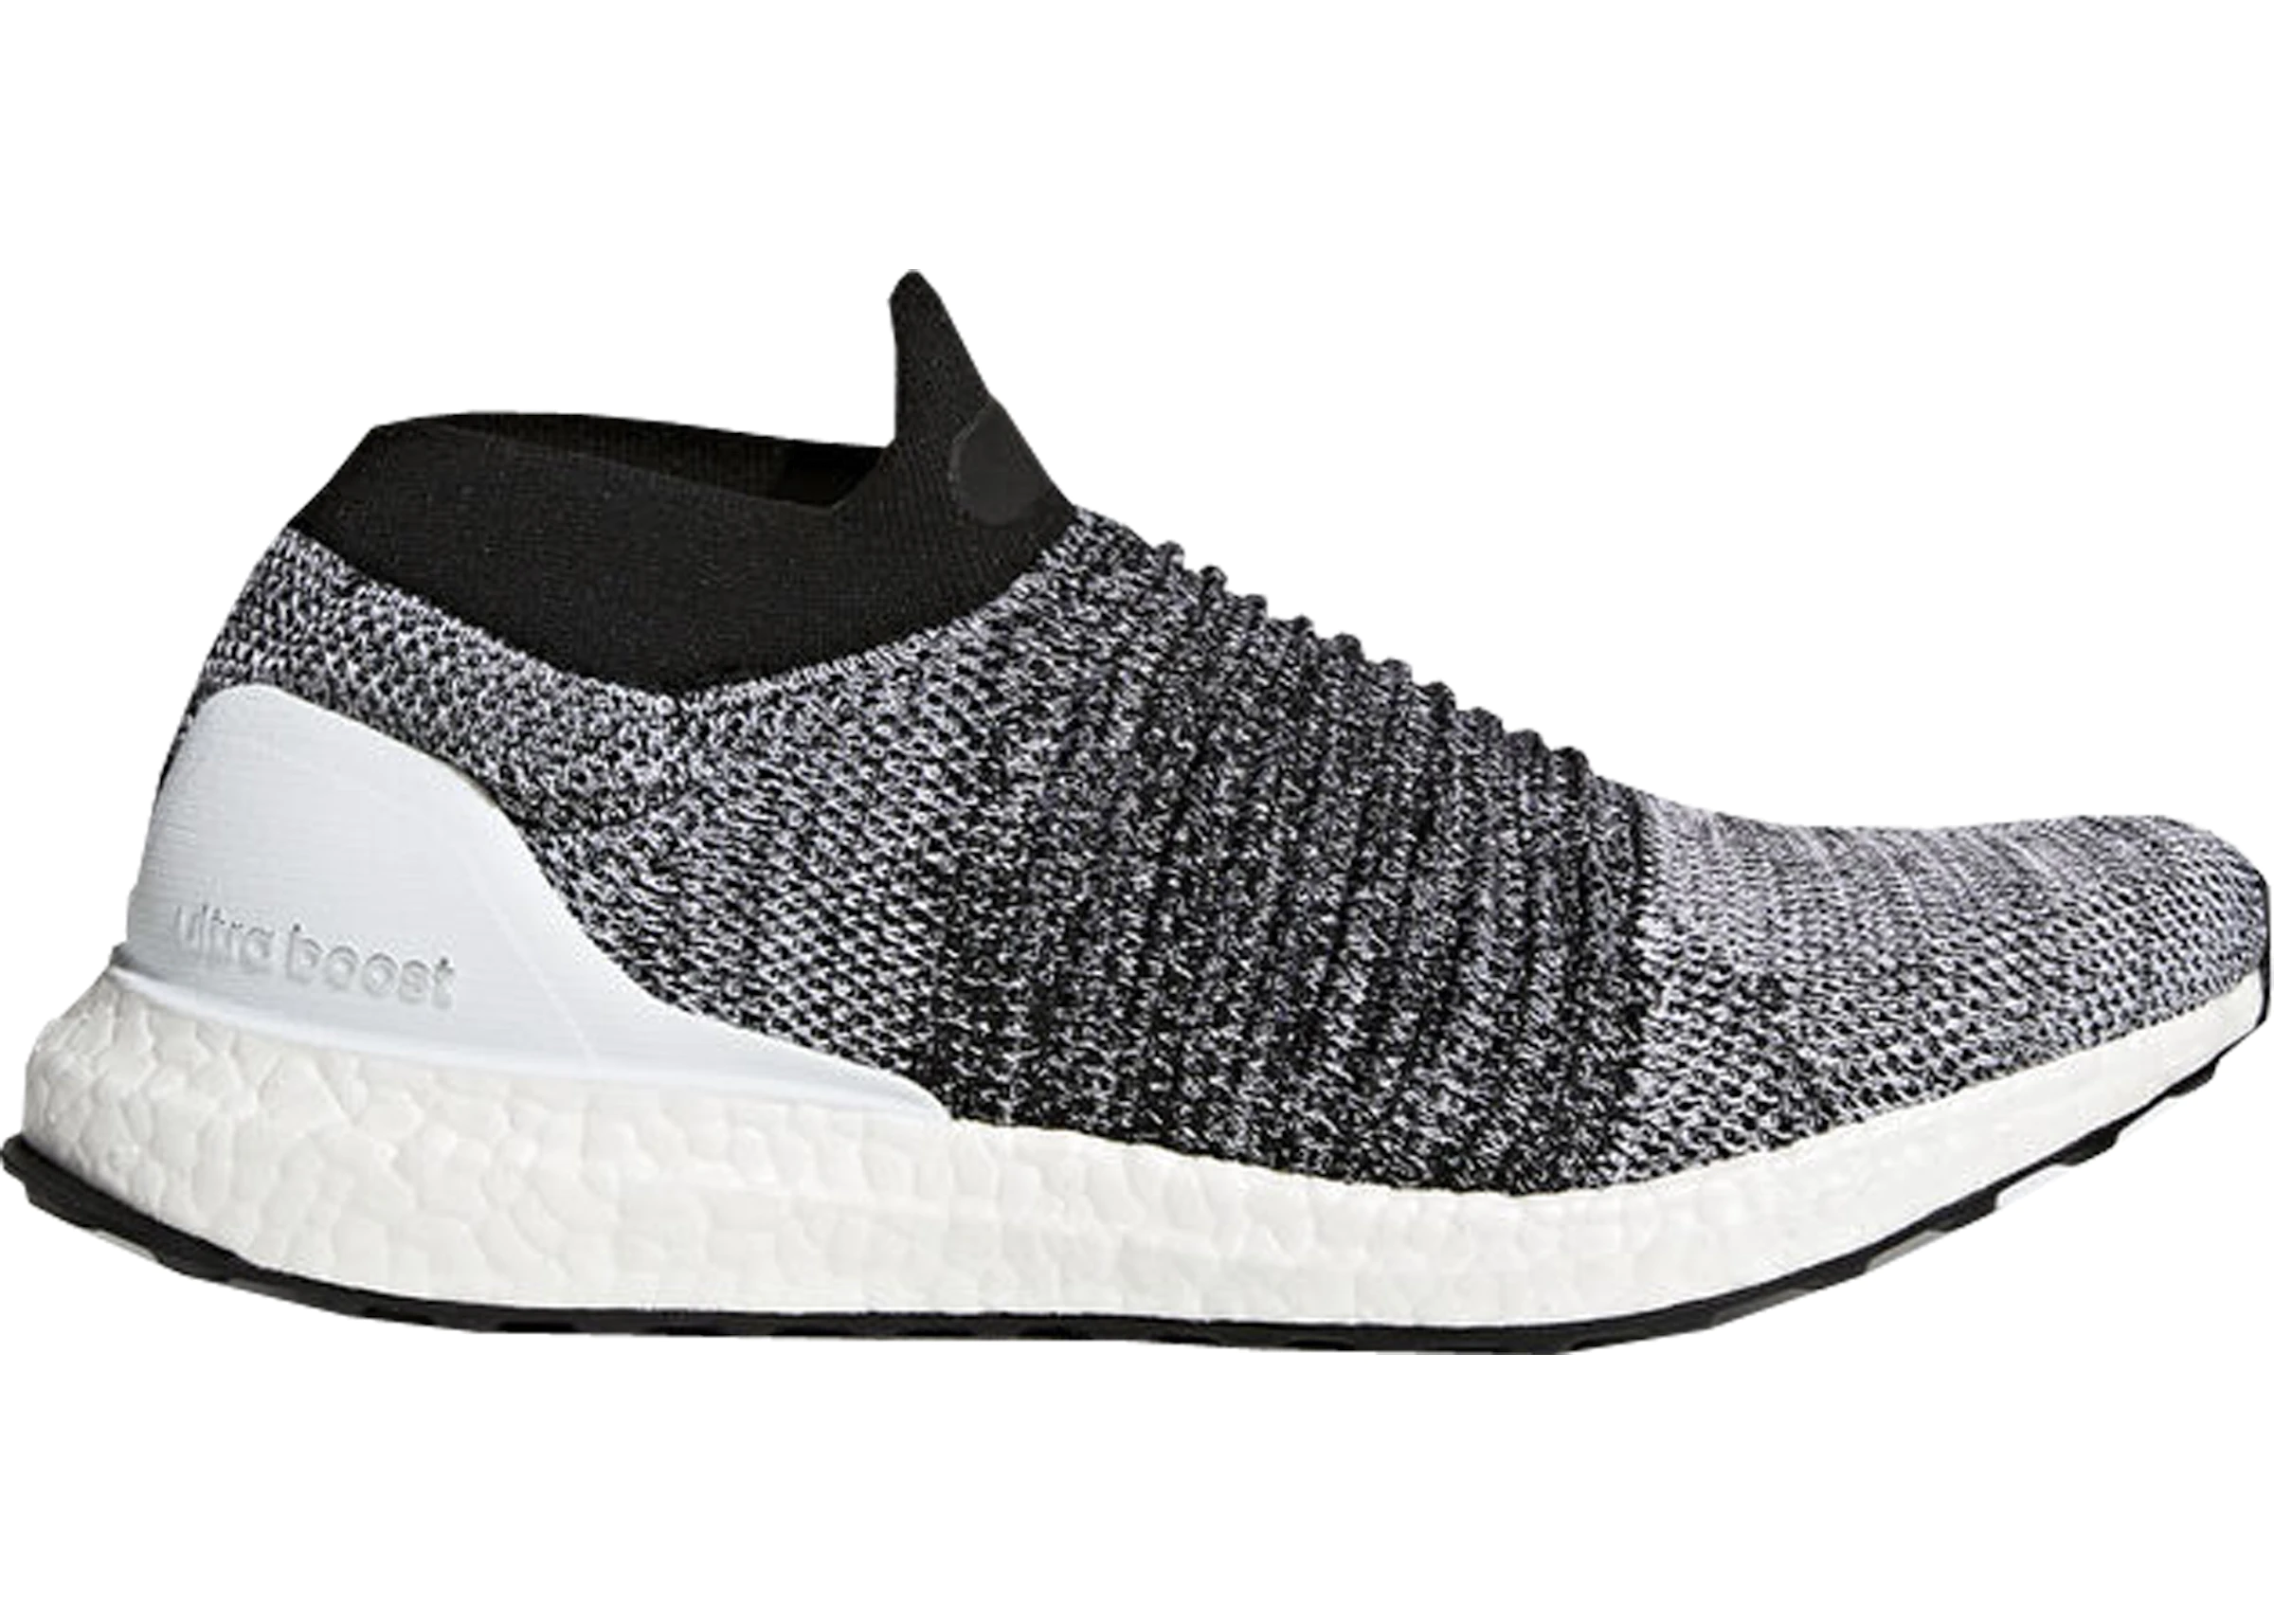 Compra adidas Ultra Boost Laceless sneakers nuevos - StockX